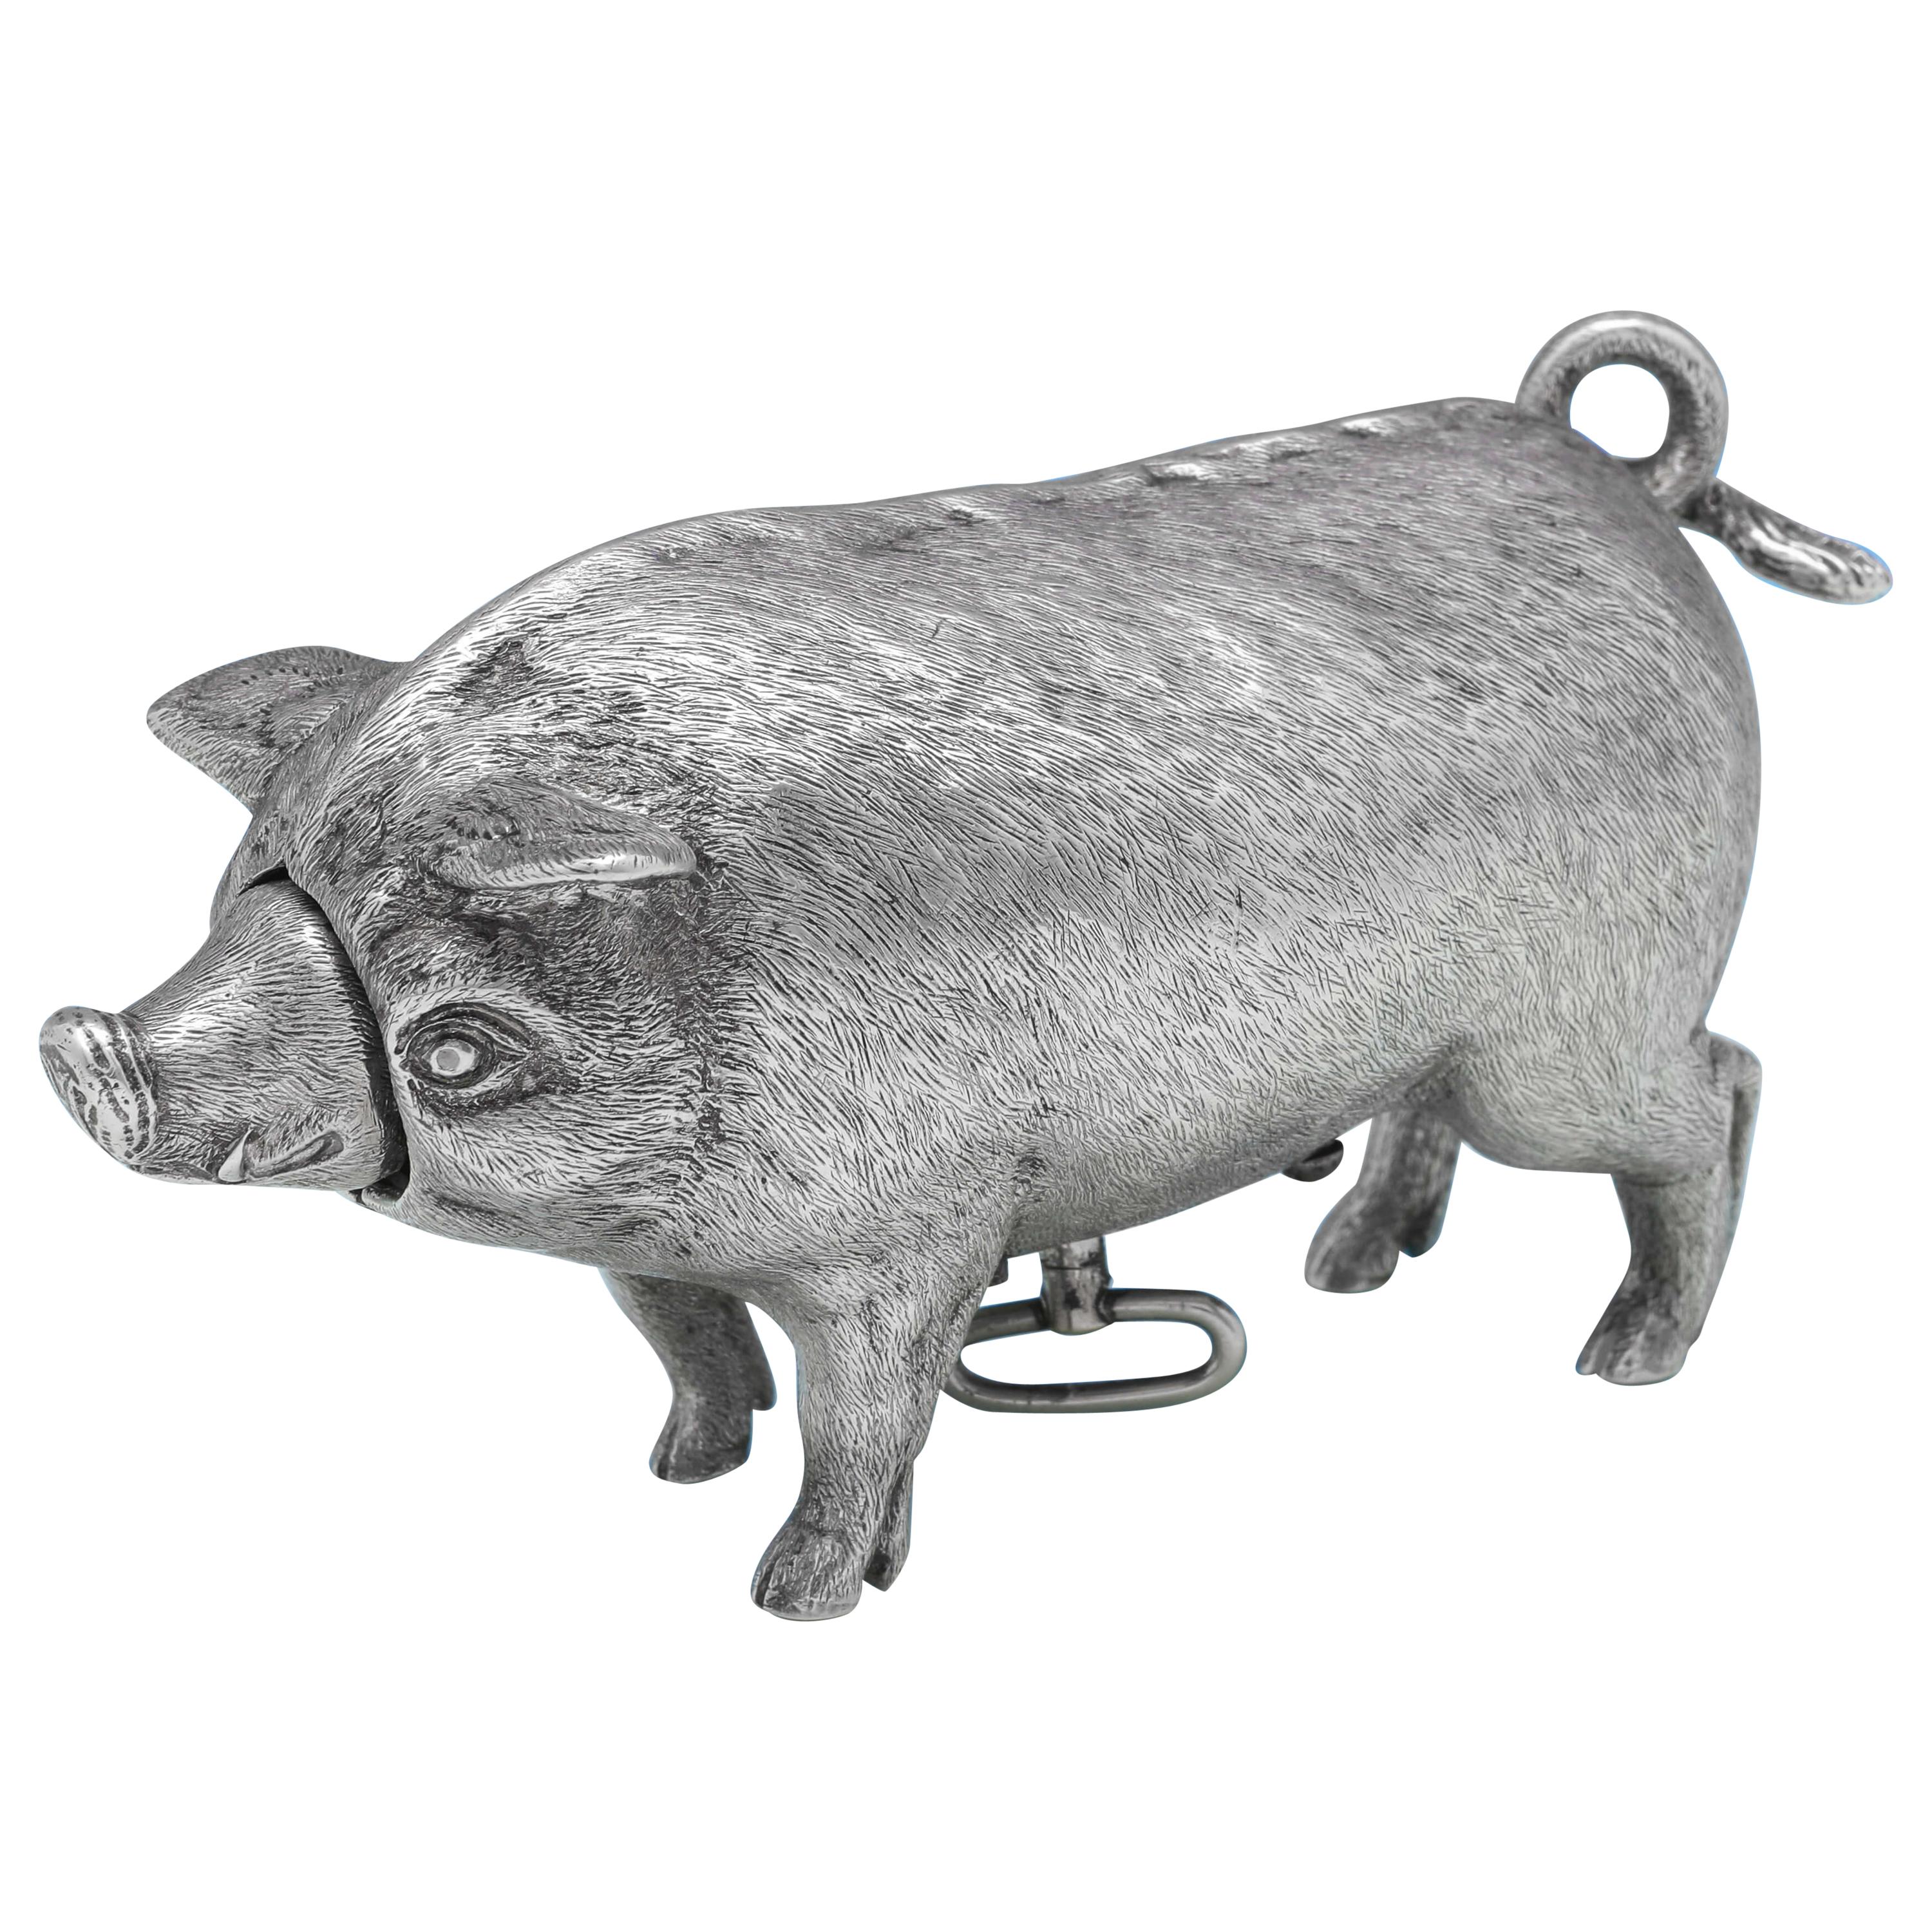 Very Rare Edwardian Sterling Silver 'Pig Bell' London 1904 by William Hornby